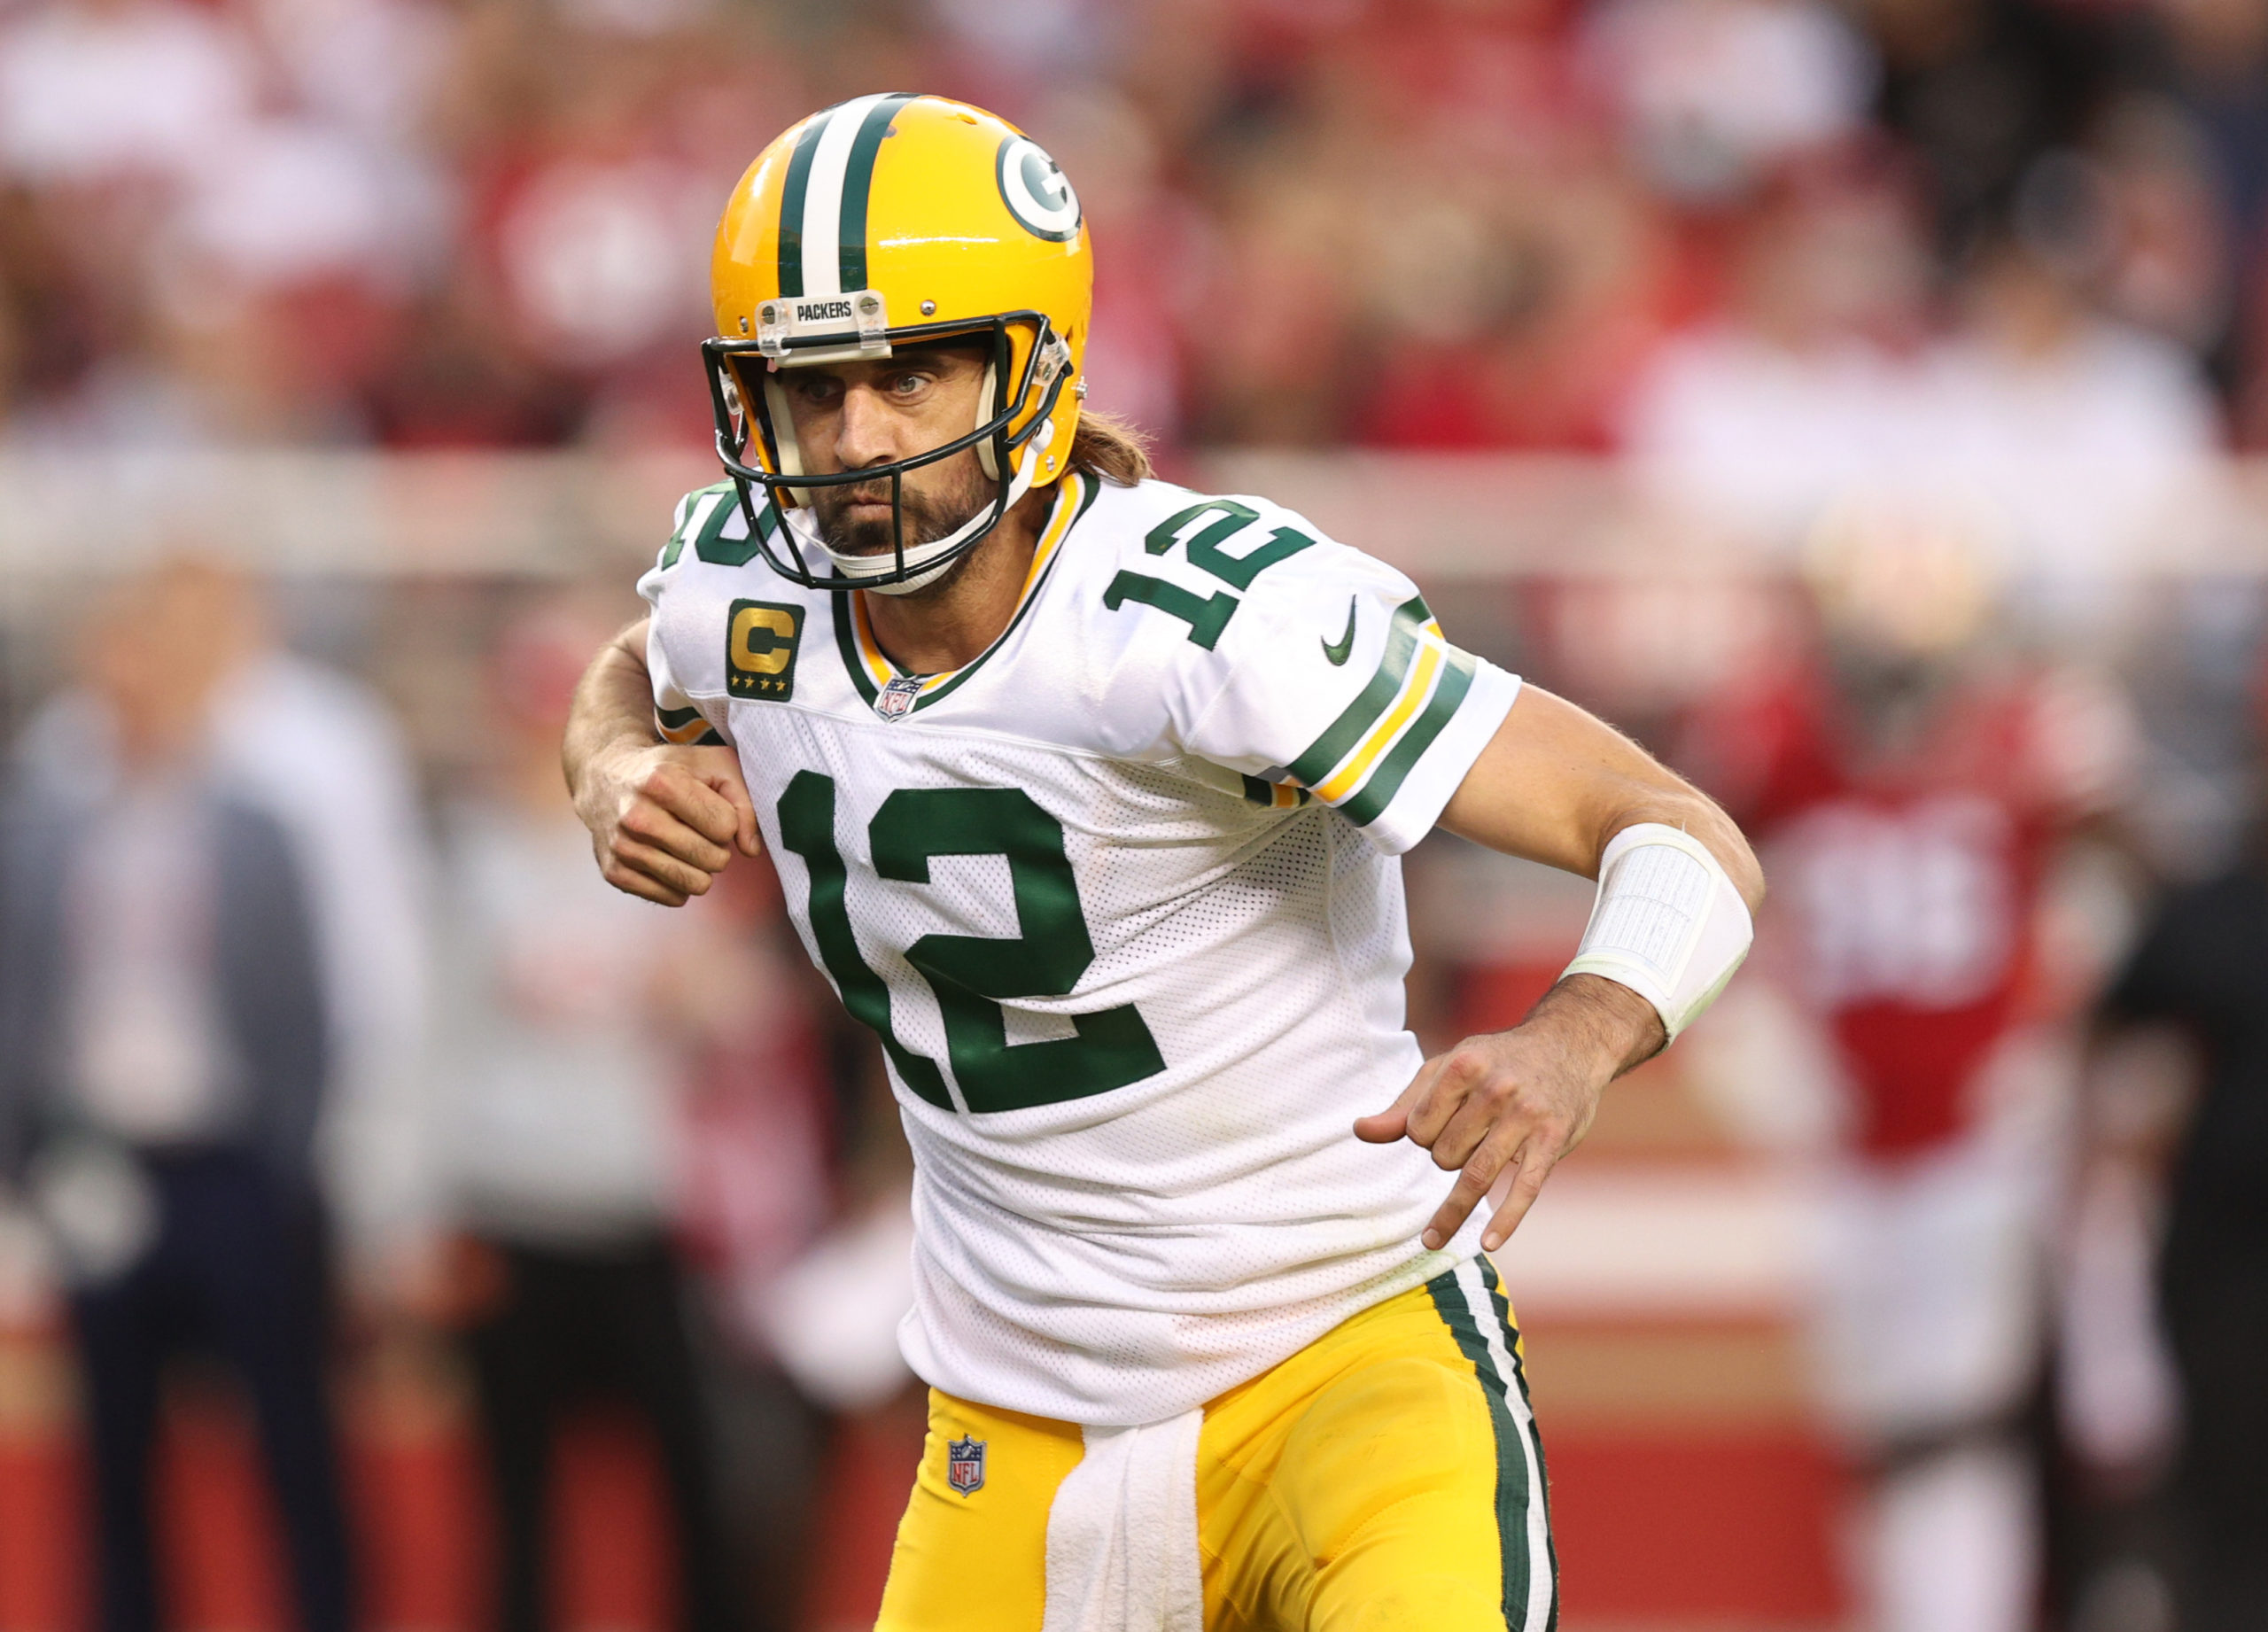 SANTA CLARA, CALIFORNIA - SEPTEMBER 26: Aaron Rodgers #12 of the Green Bay Packers celebrates after a touchdown during the second quarter against the San Francisco 49ers in the game at Levi's Stadium on September 26, 2021 in Santa Clara, California. Ezra Shaw/Getty Images